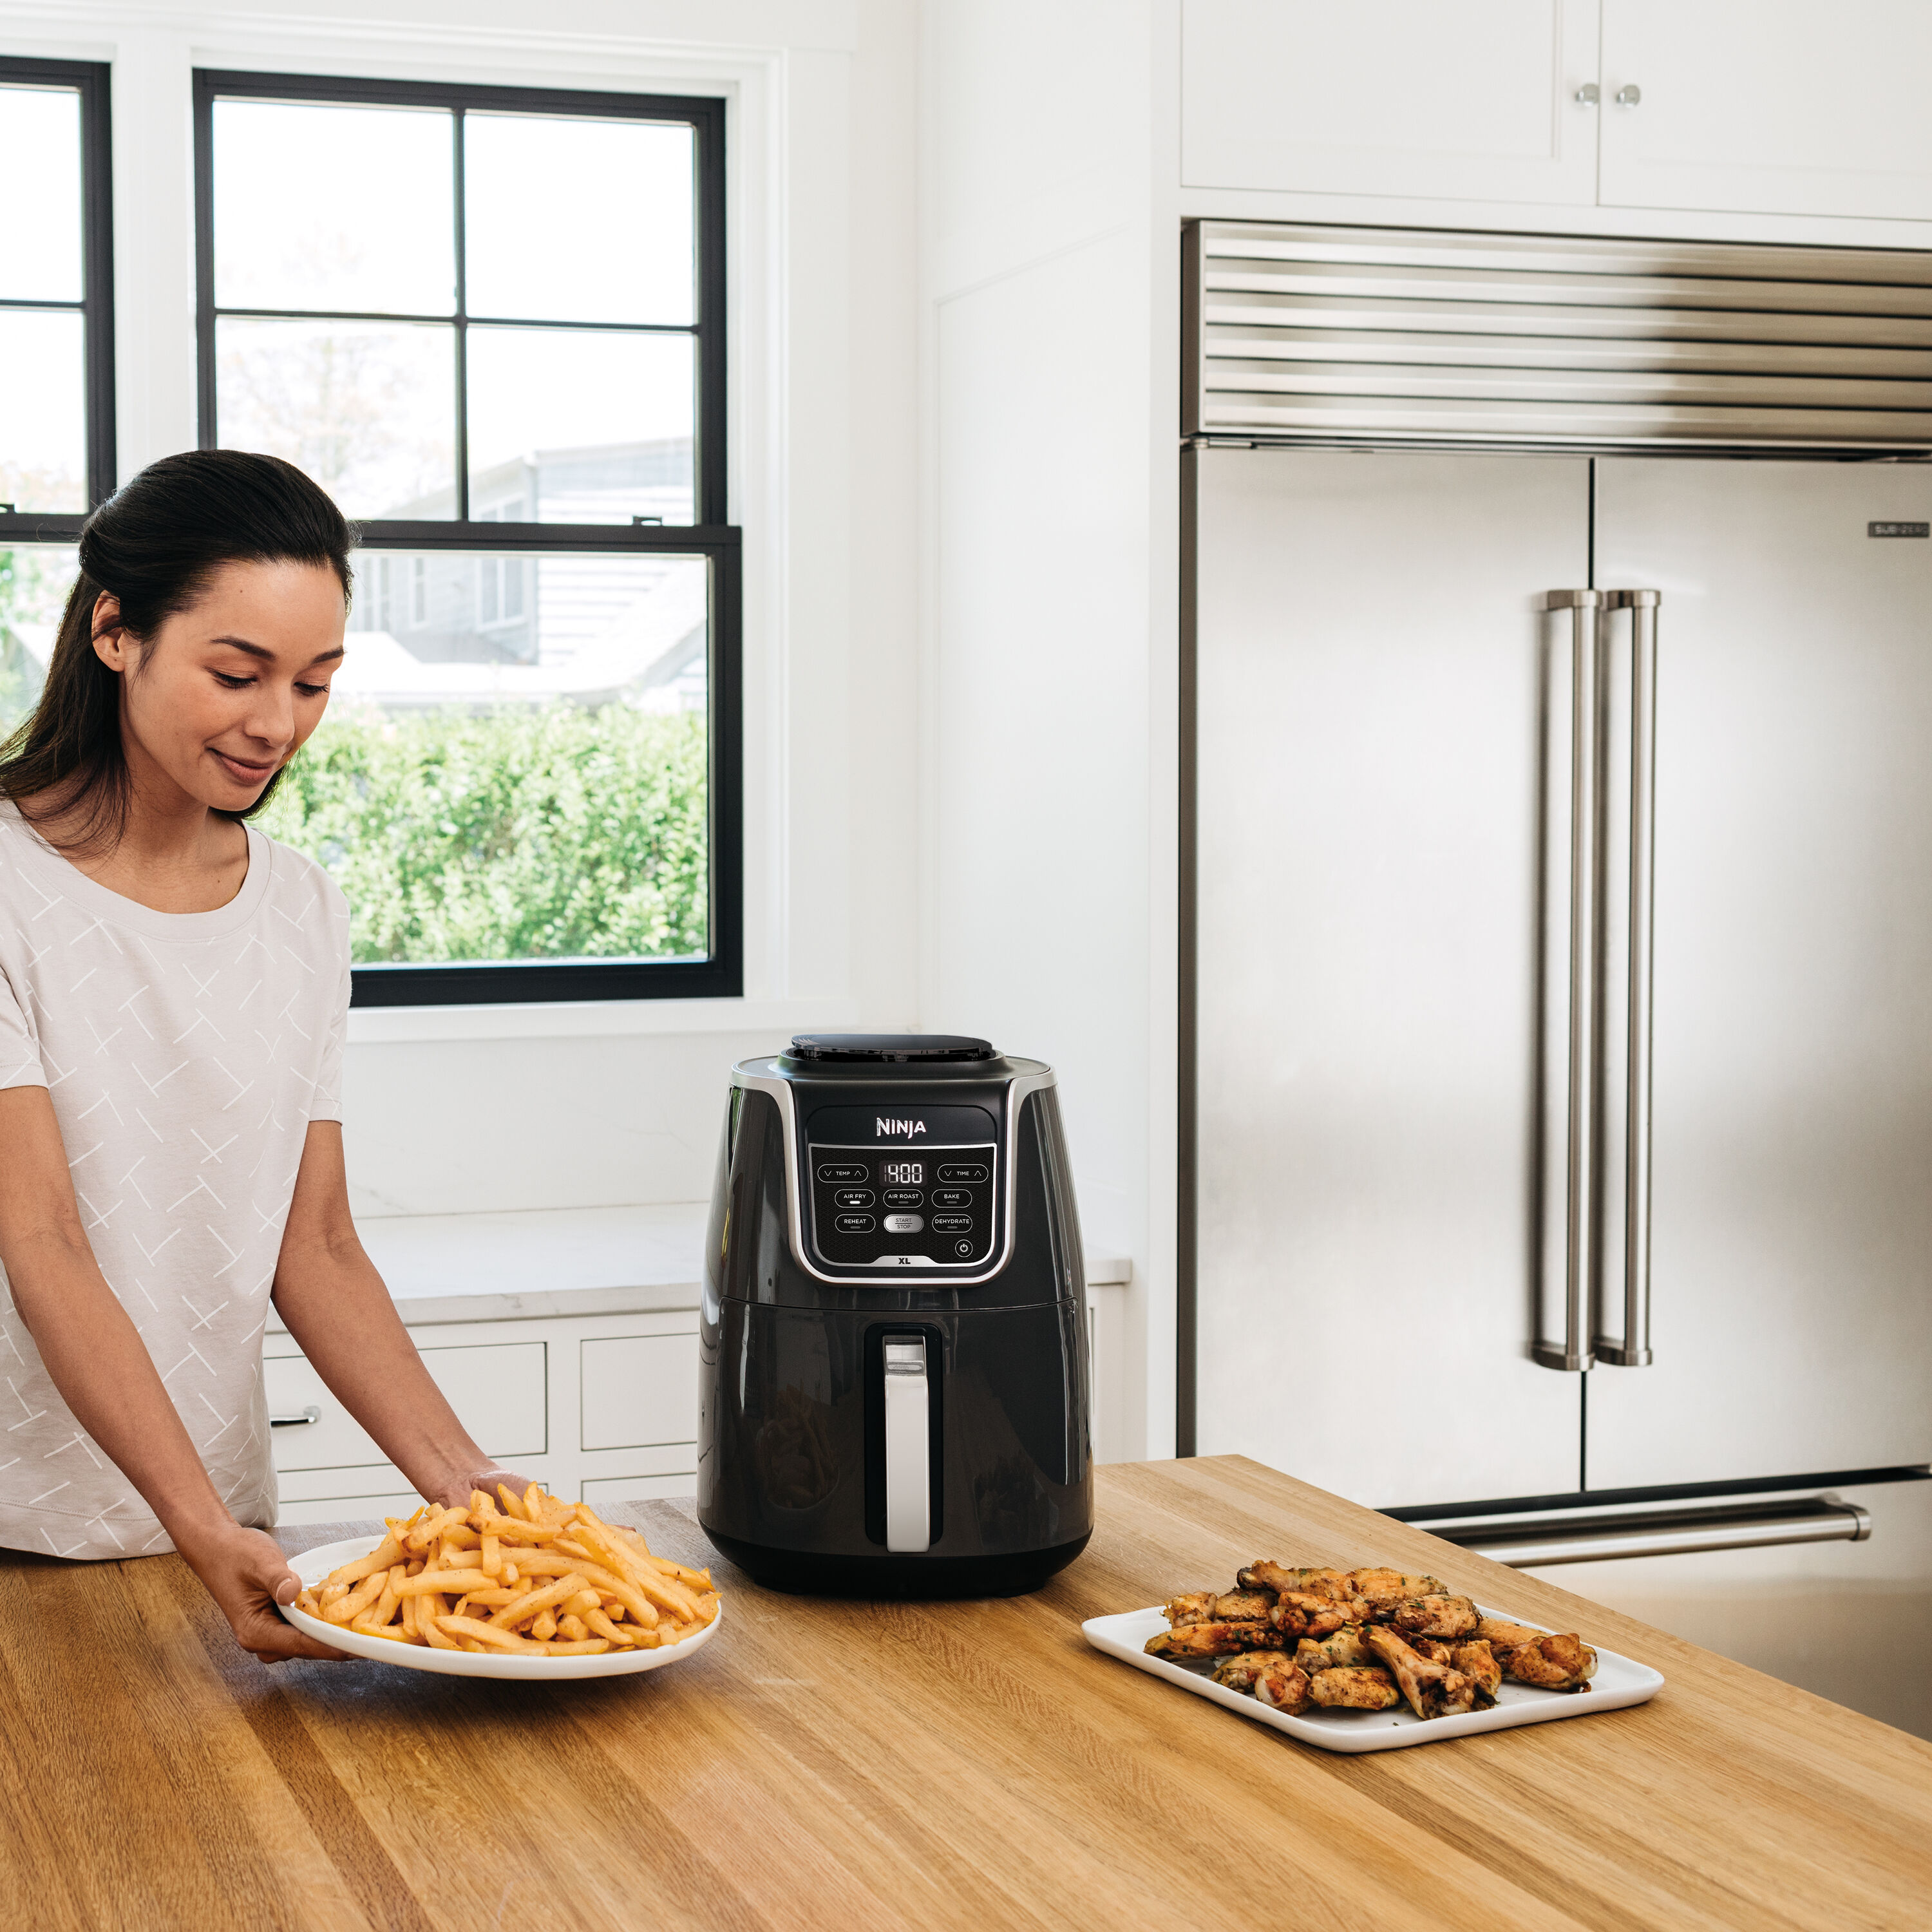  Ninja DZ071 Foodi 6-in-1 DualZone FlexBasket Air Fryer with 7-QT  MegaZone & Basket Divider, Large Proteins & Full Meals, Smart Finish Cook 2  Foods 2 Ways, Large Capacity, Air Fry, Bake